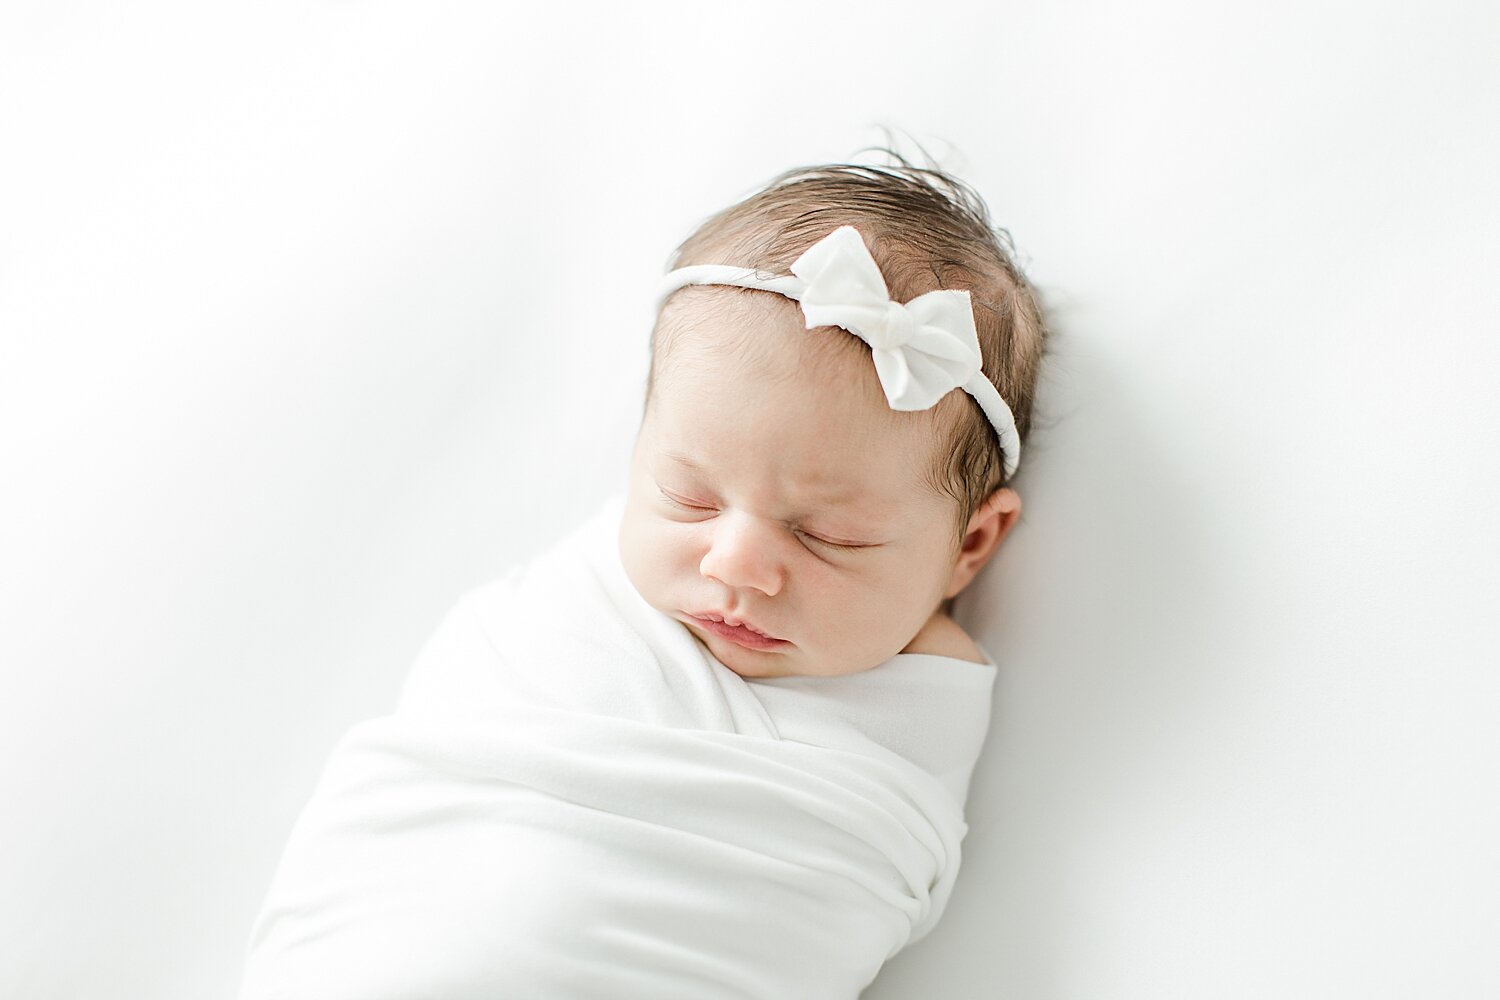 Classic newborn portrait in all white with Kristin Wood Photography in Westport, CT.